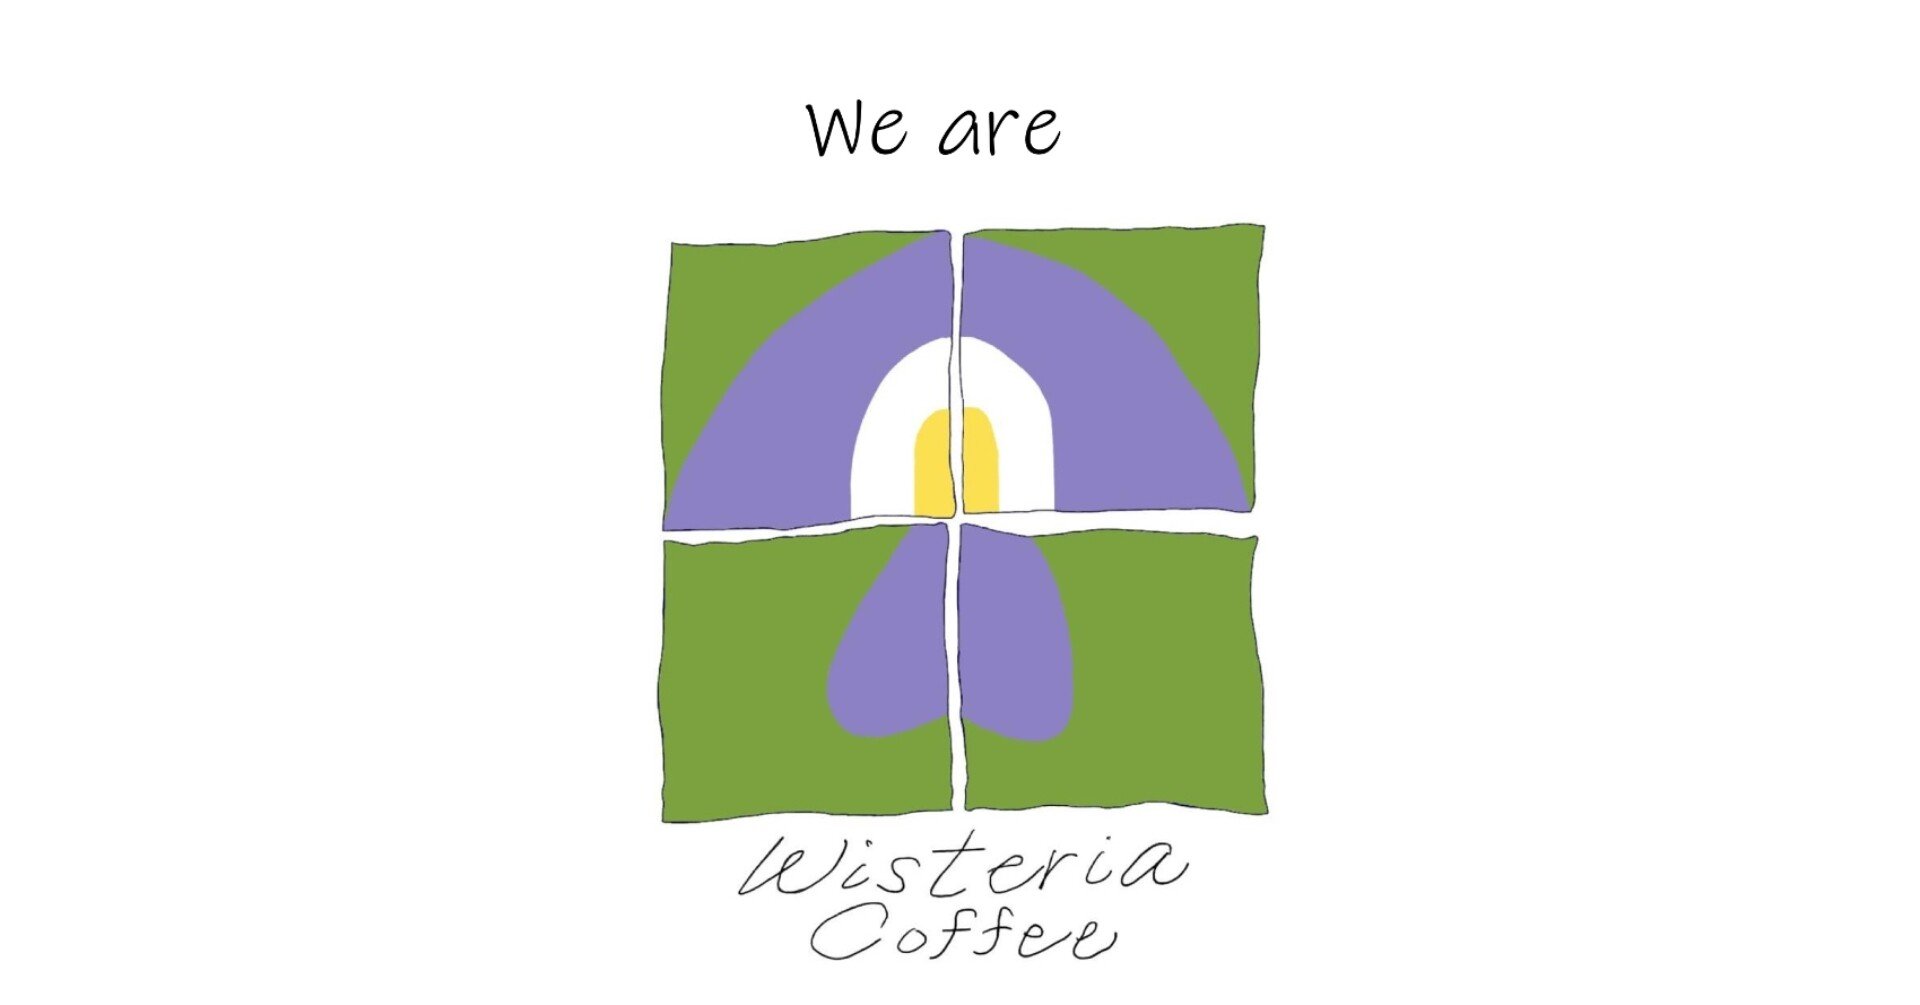 About Wisteria Coffee 藤沼 孝吉 Note